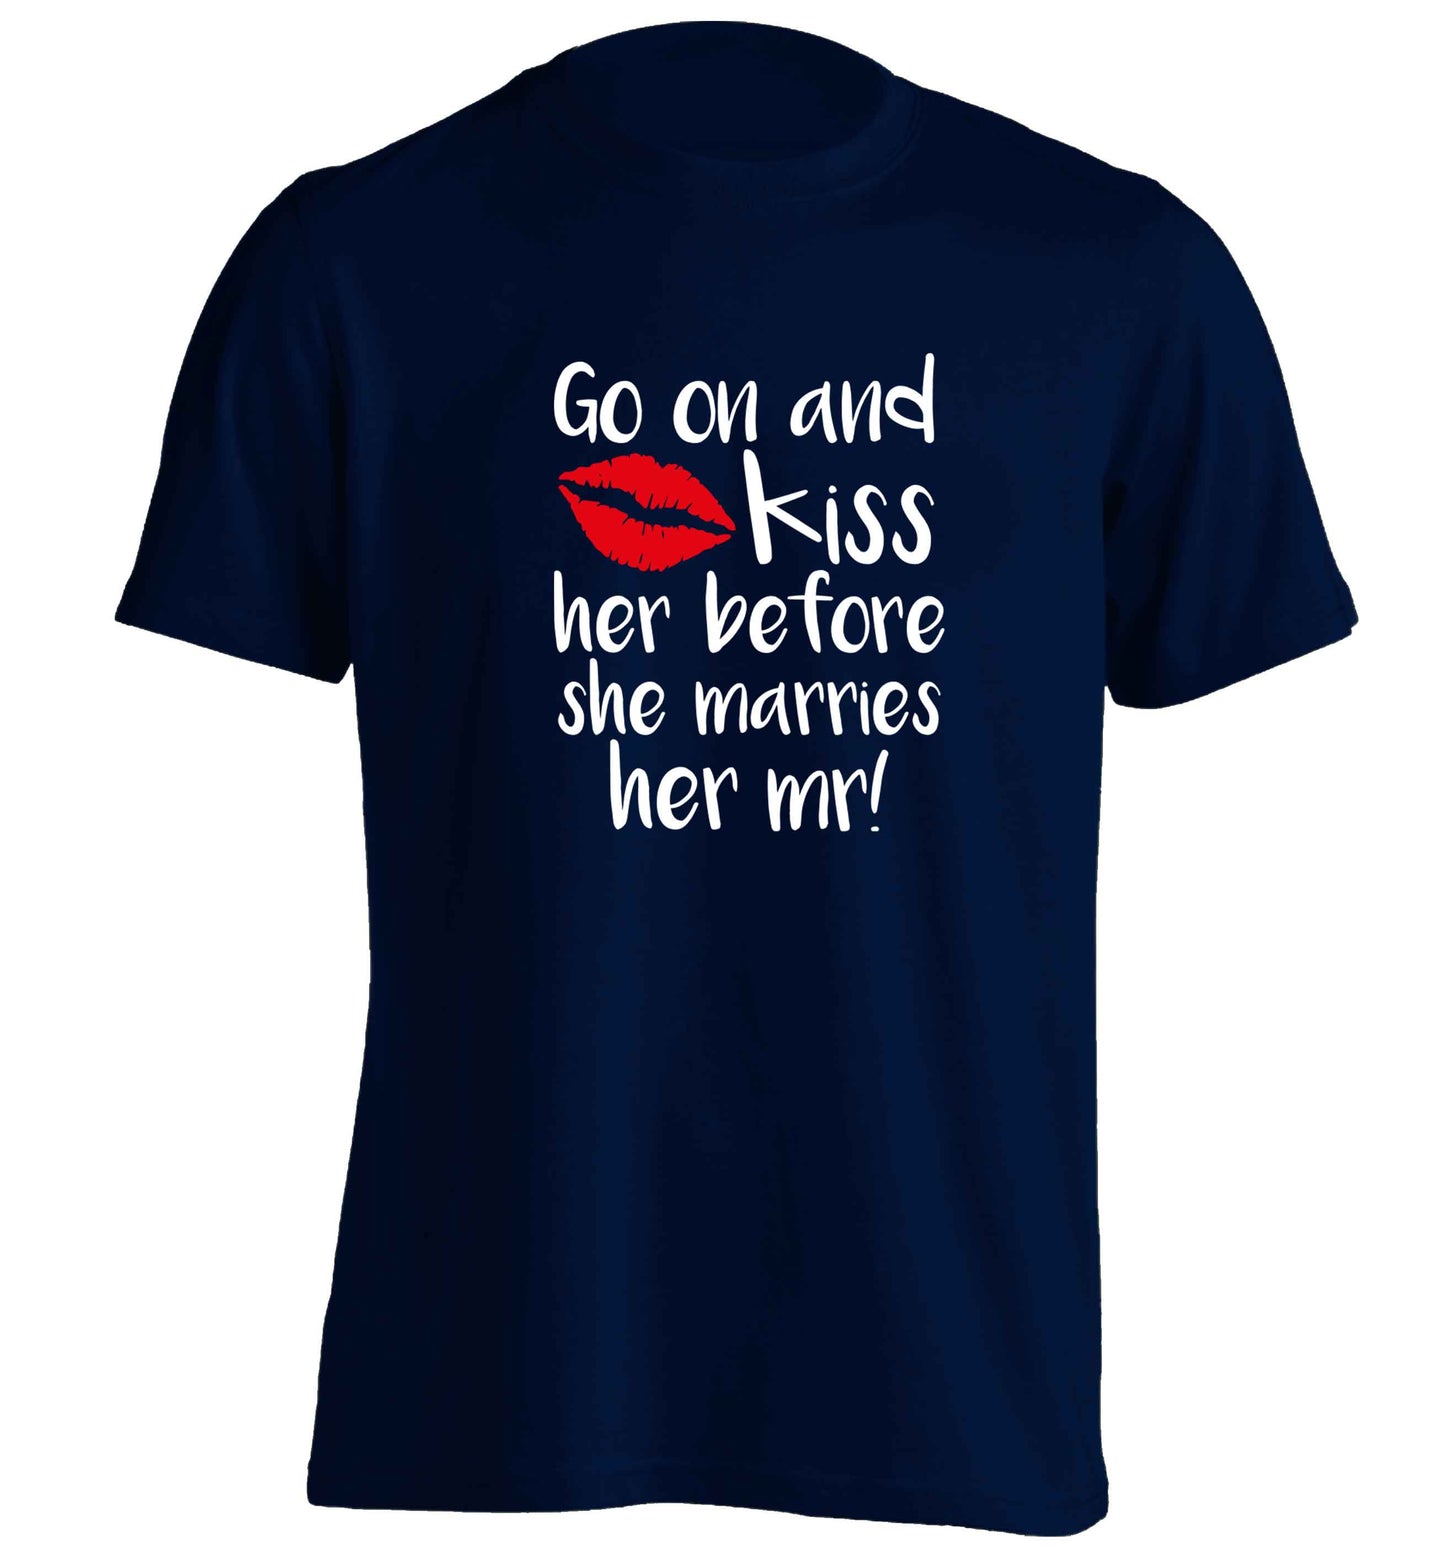 Kiss her before she marries her mr! adults unisex navy Tshirt 2XL